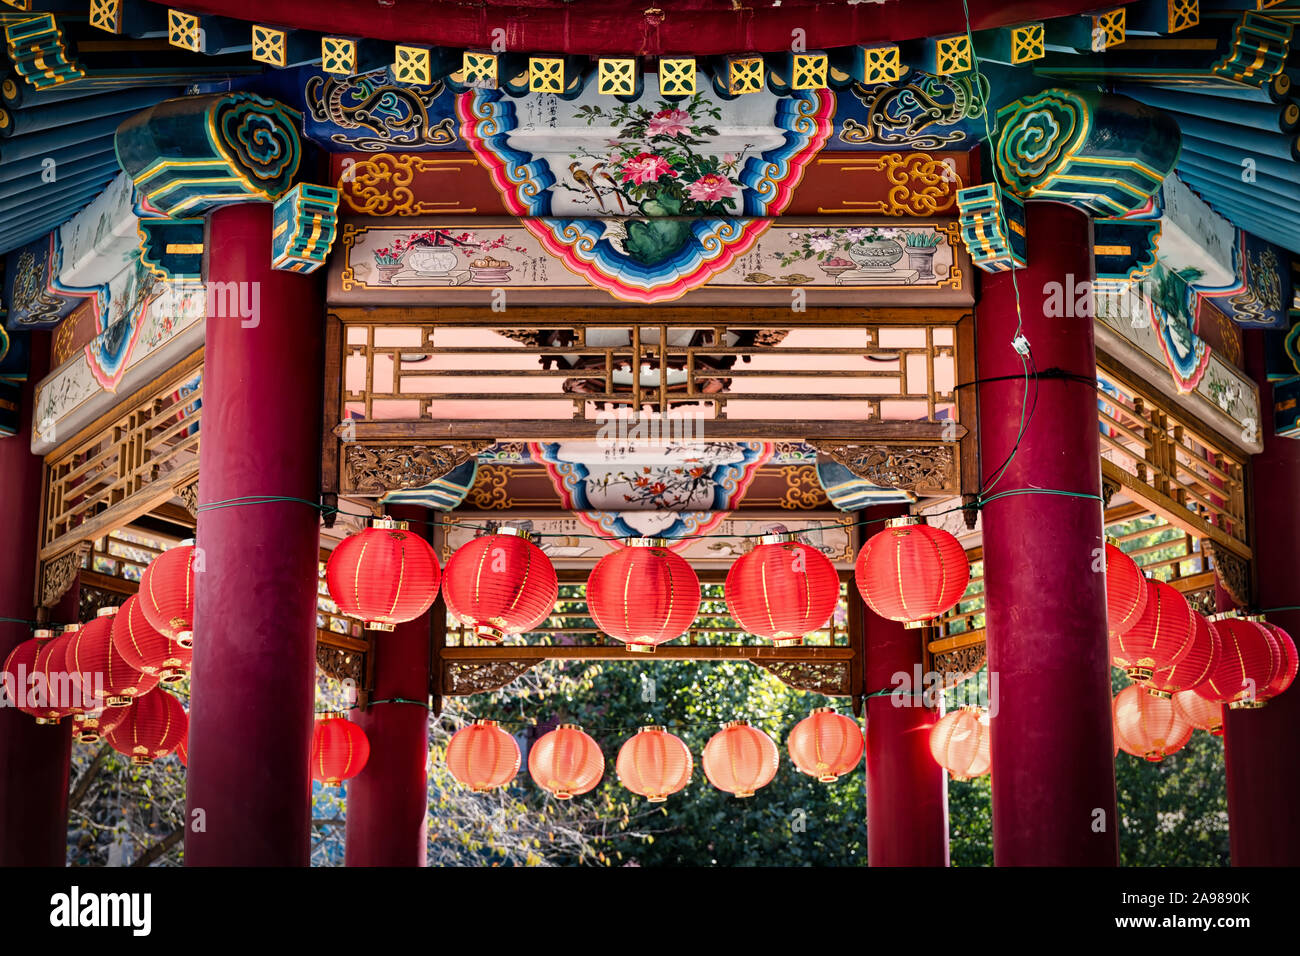 The sun shines on lamps from behind a gazebo at Chinatown in Yokohama, Japan. Stock Photo